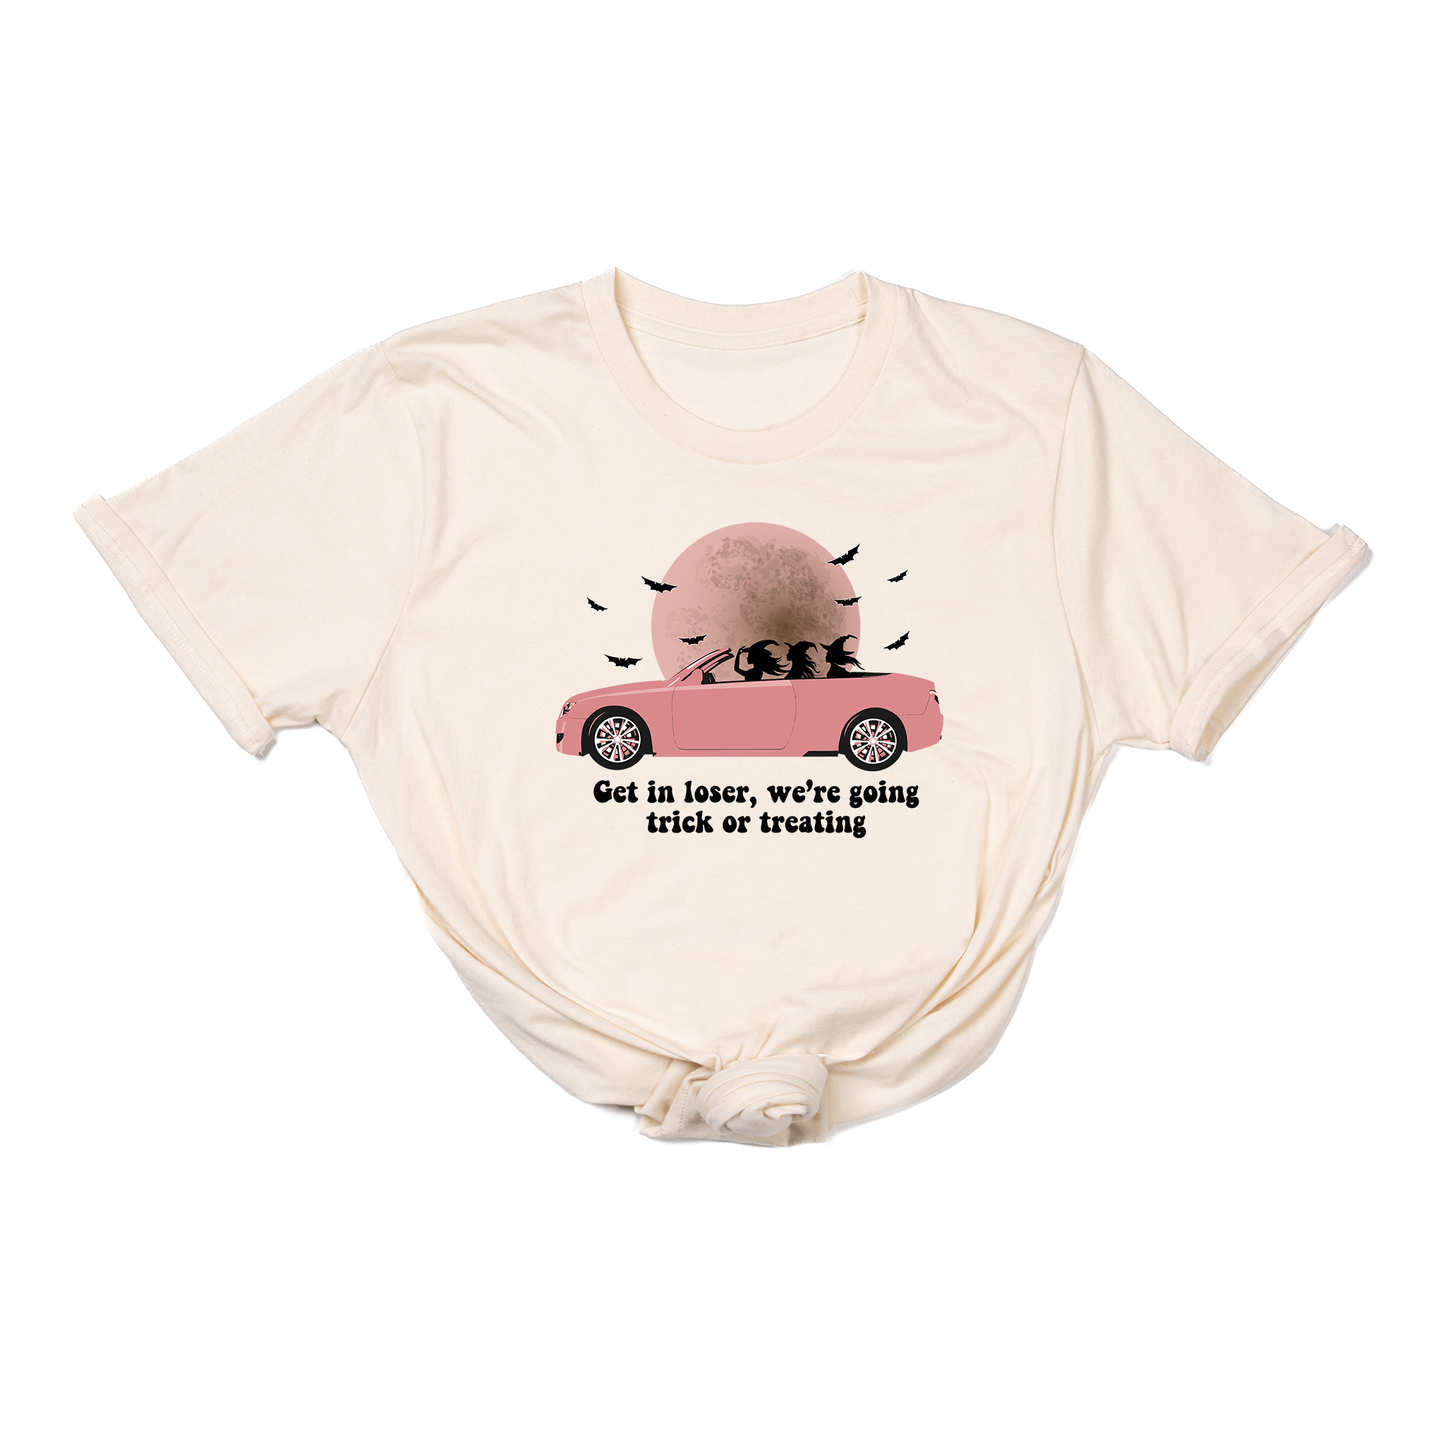 Get in Loser, We're Going Trick or Treating (Black)  - Tee (Natural)